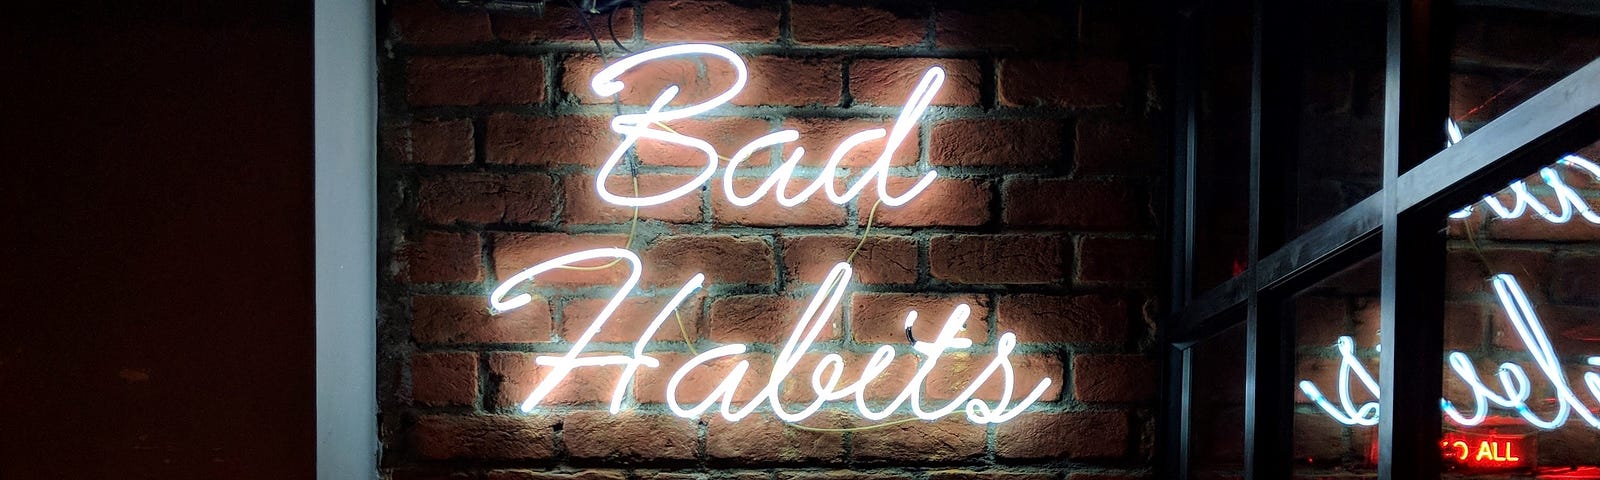 neon sign that says bad habits